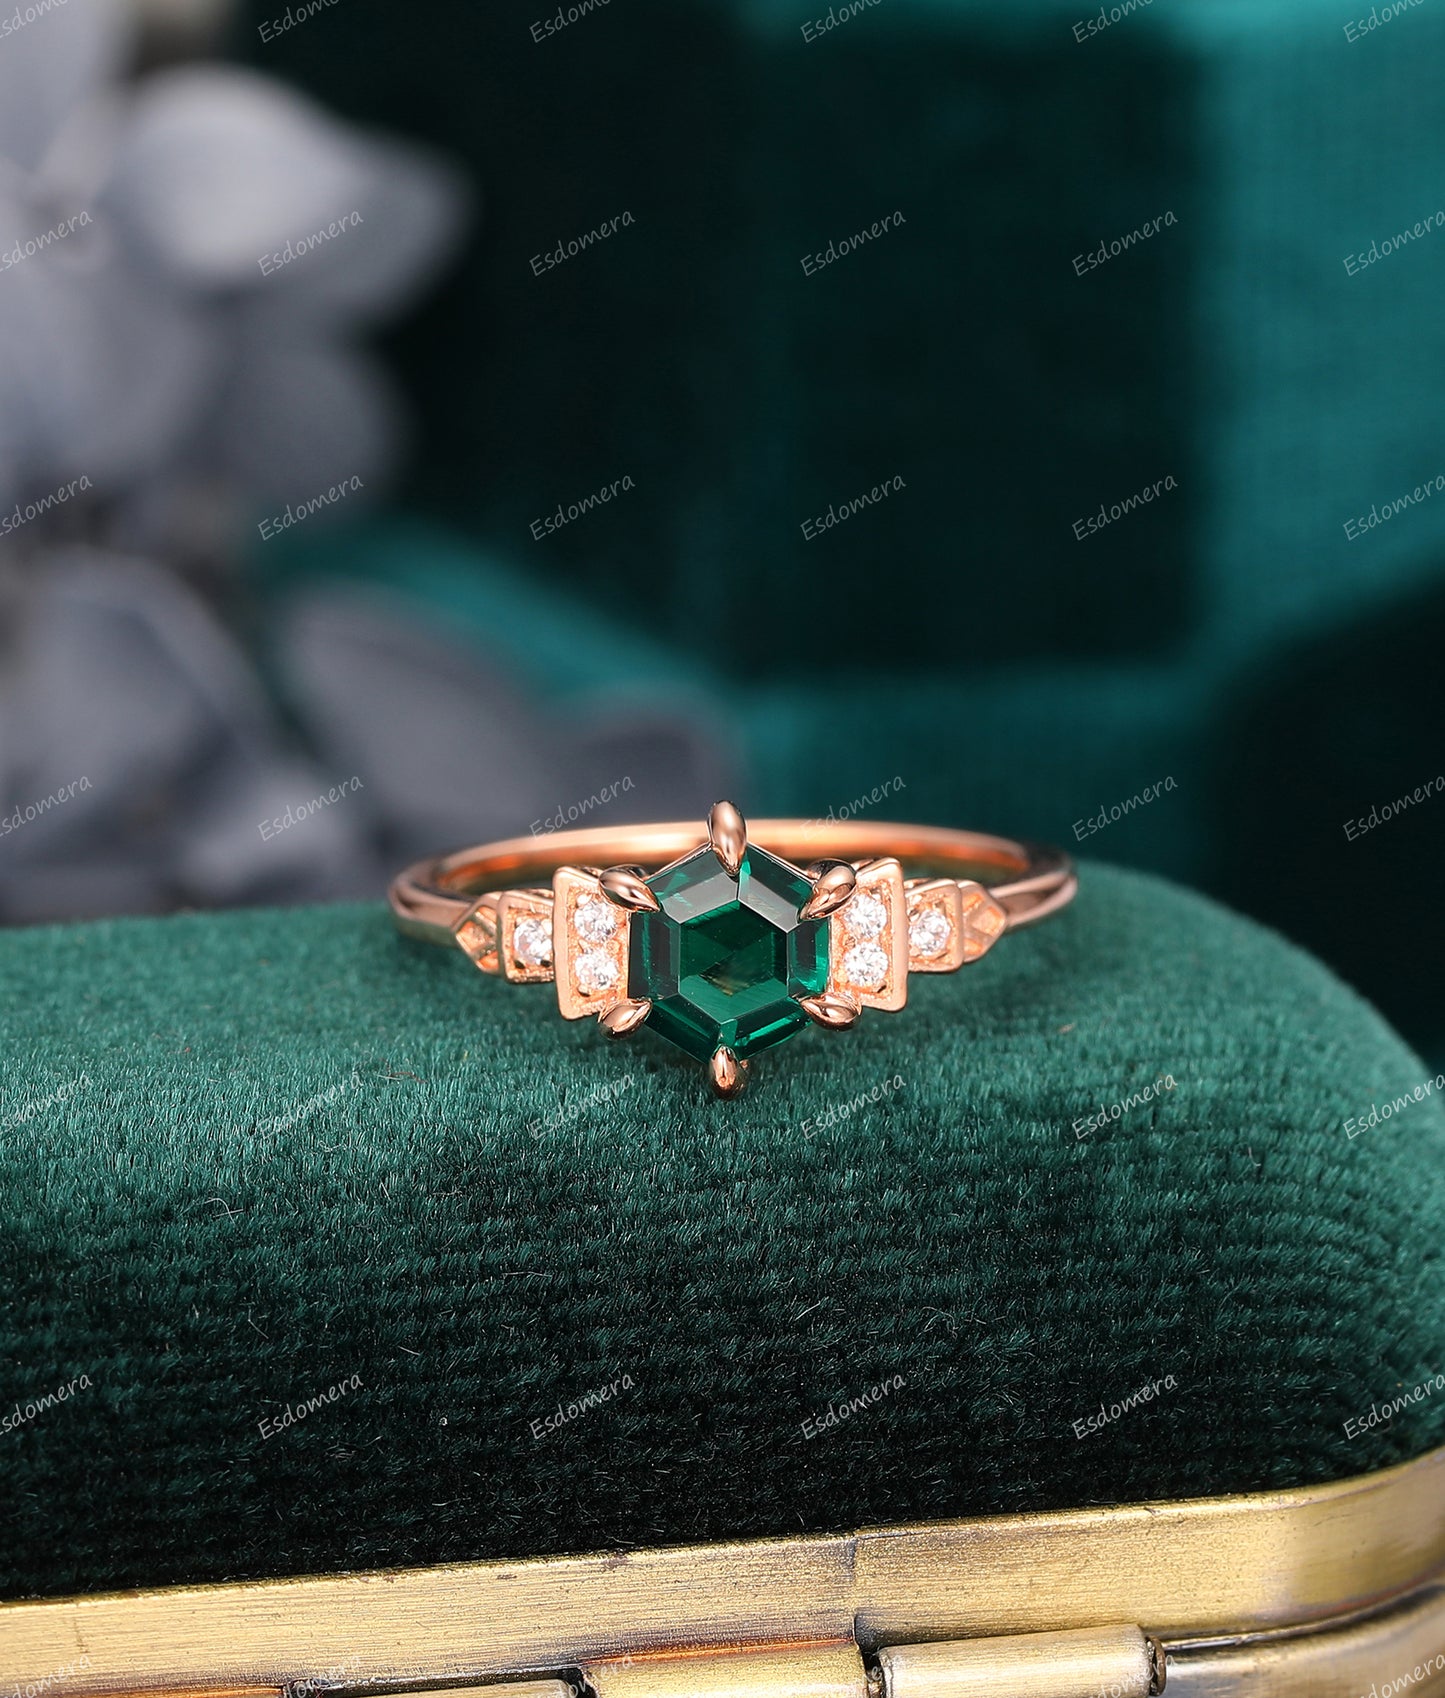 Hexagon Cut 0.85CT Emerald Ring, Moissanite Accent Wedding Ring, Delicate 14K Rose Gold Ring